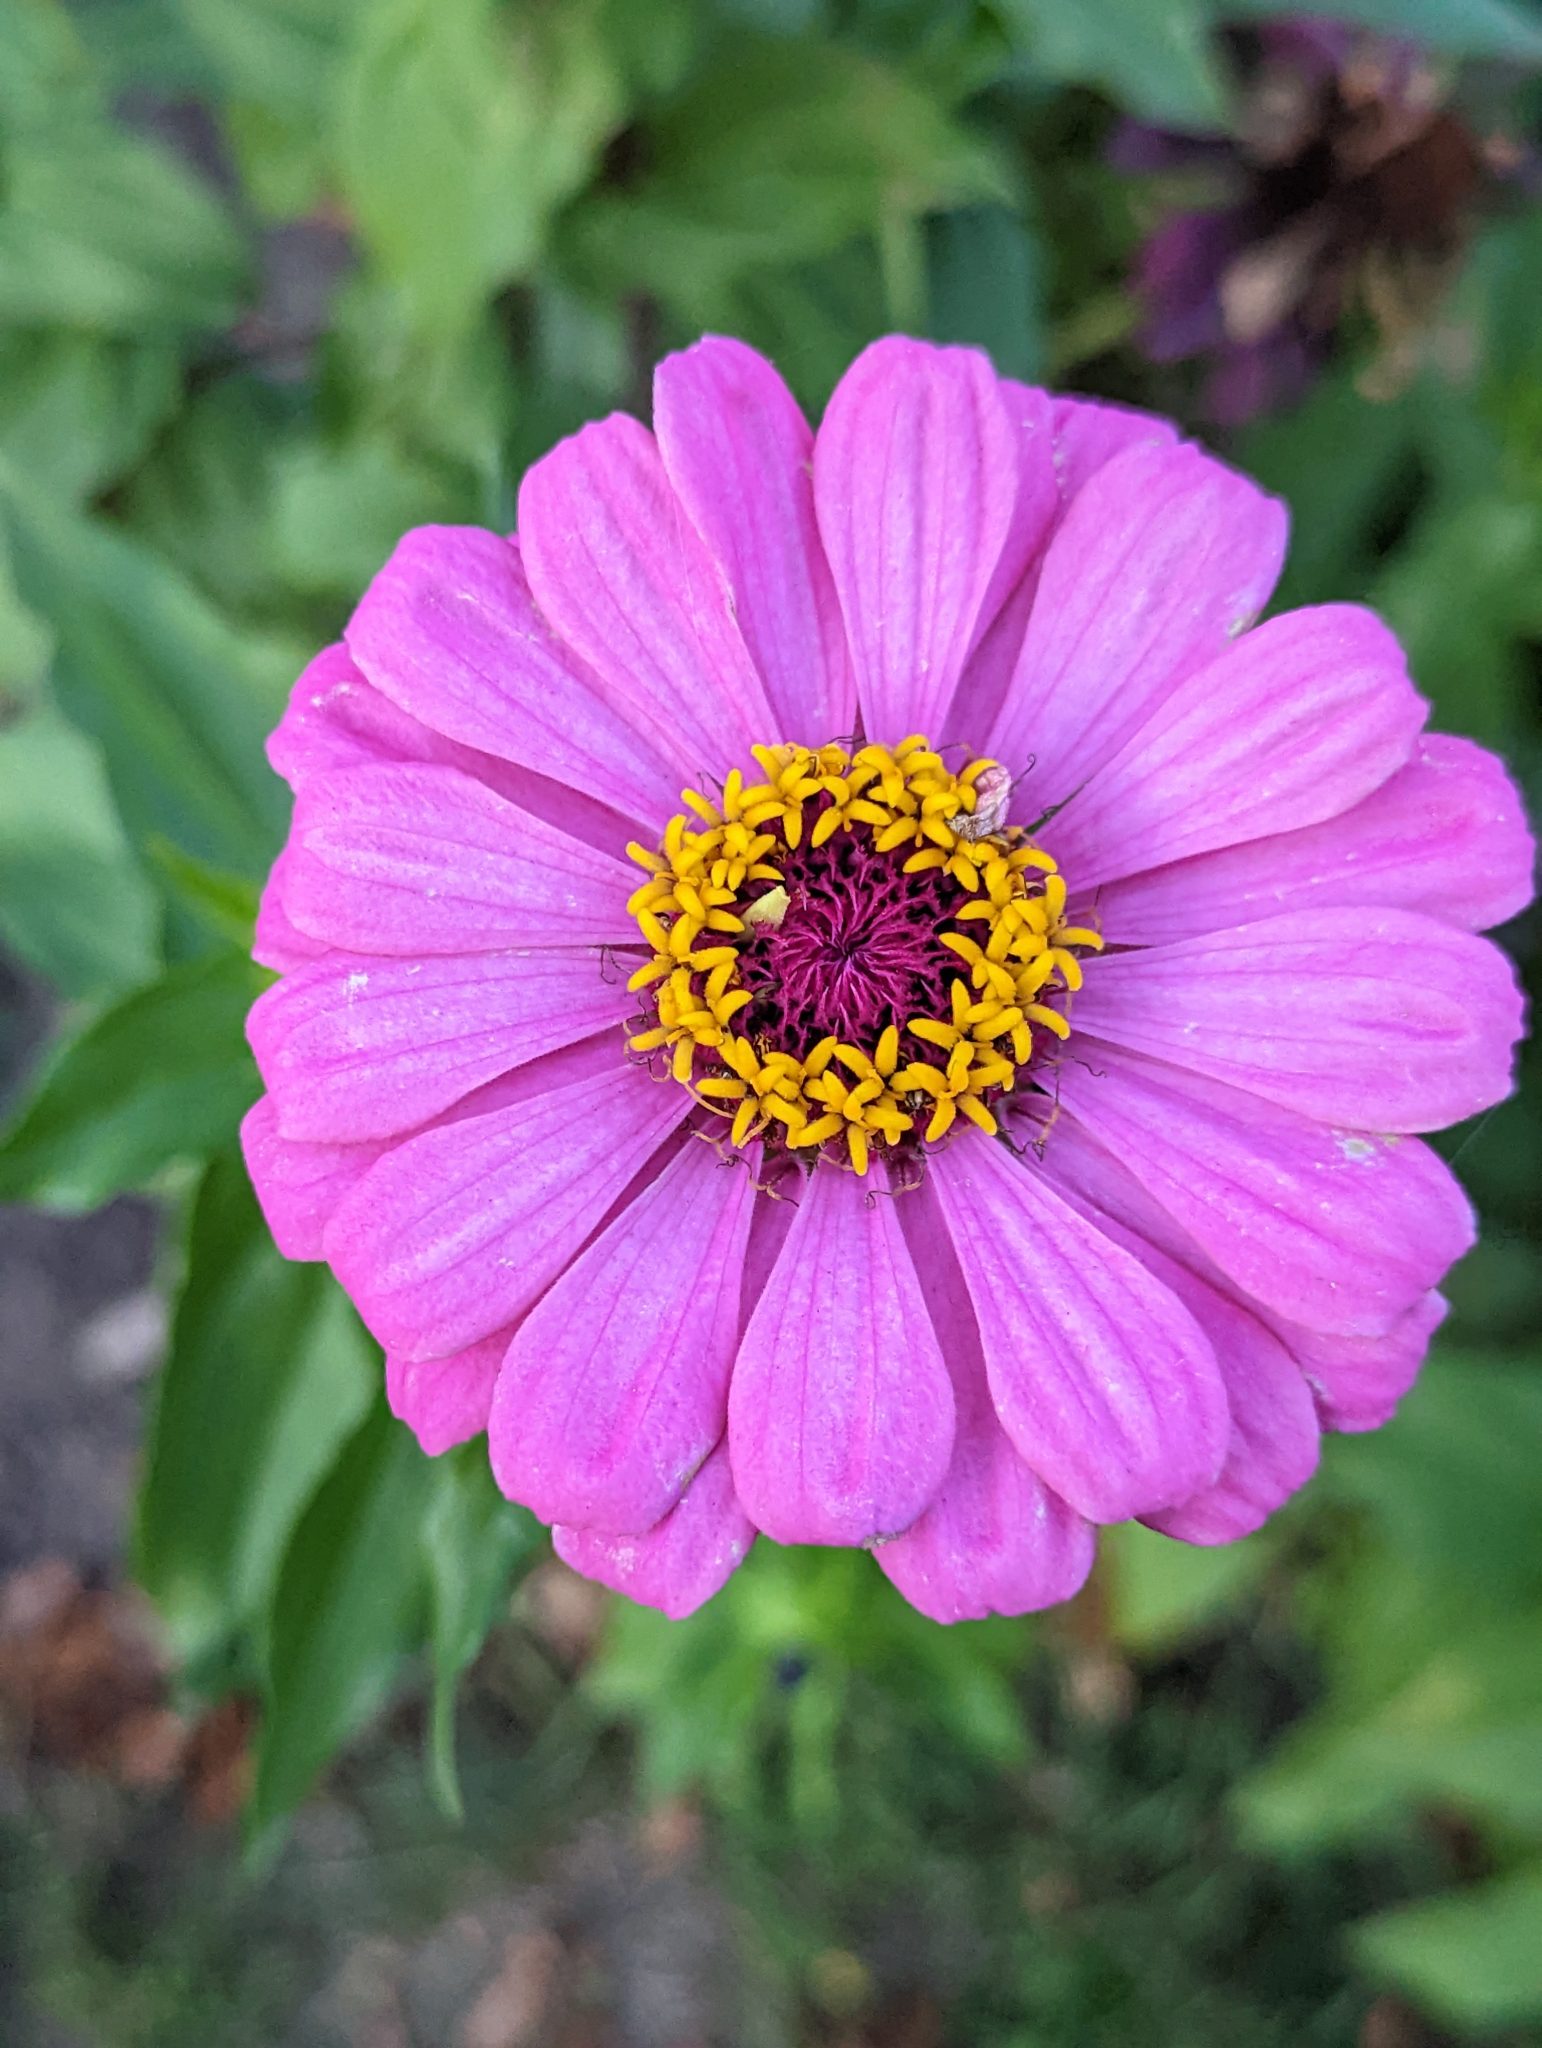 A circular pink flower, with yellow in the center